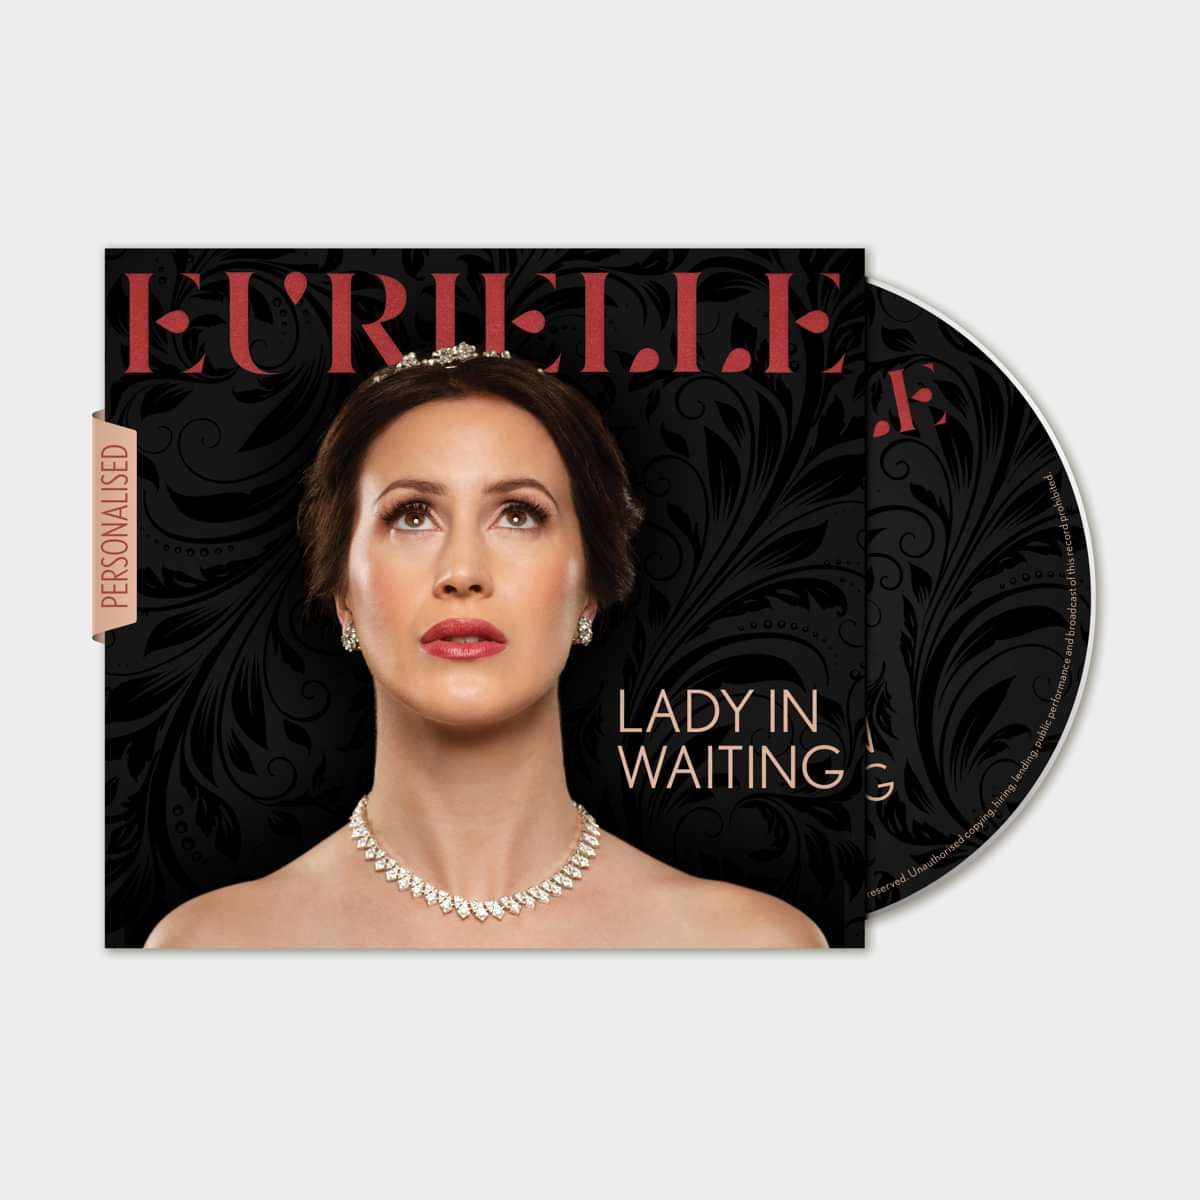 CD Bundle 15% Discount: Buy 2 (Or Any Multiple Of 2) Different CDs From Eurielle's Store - Eurielle